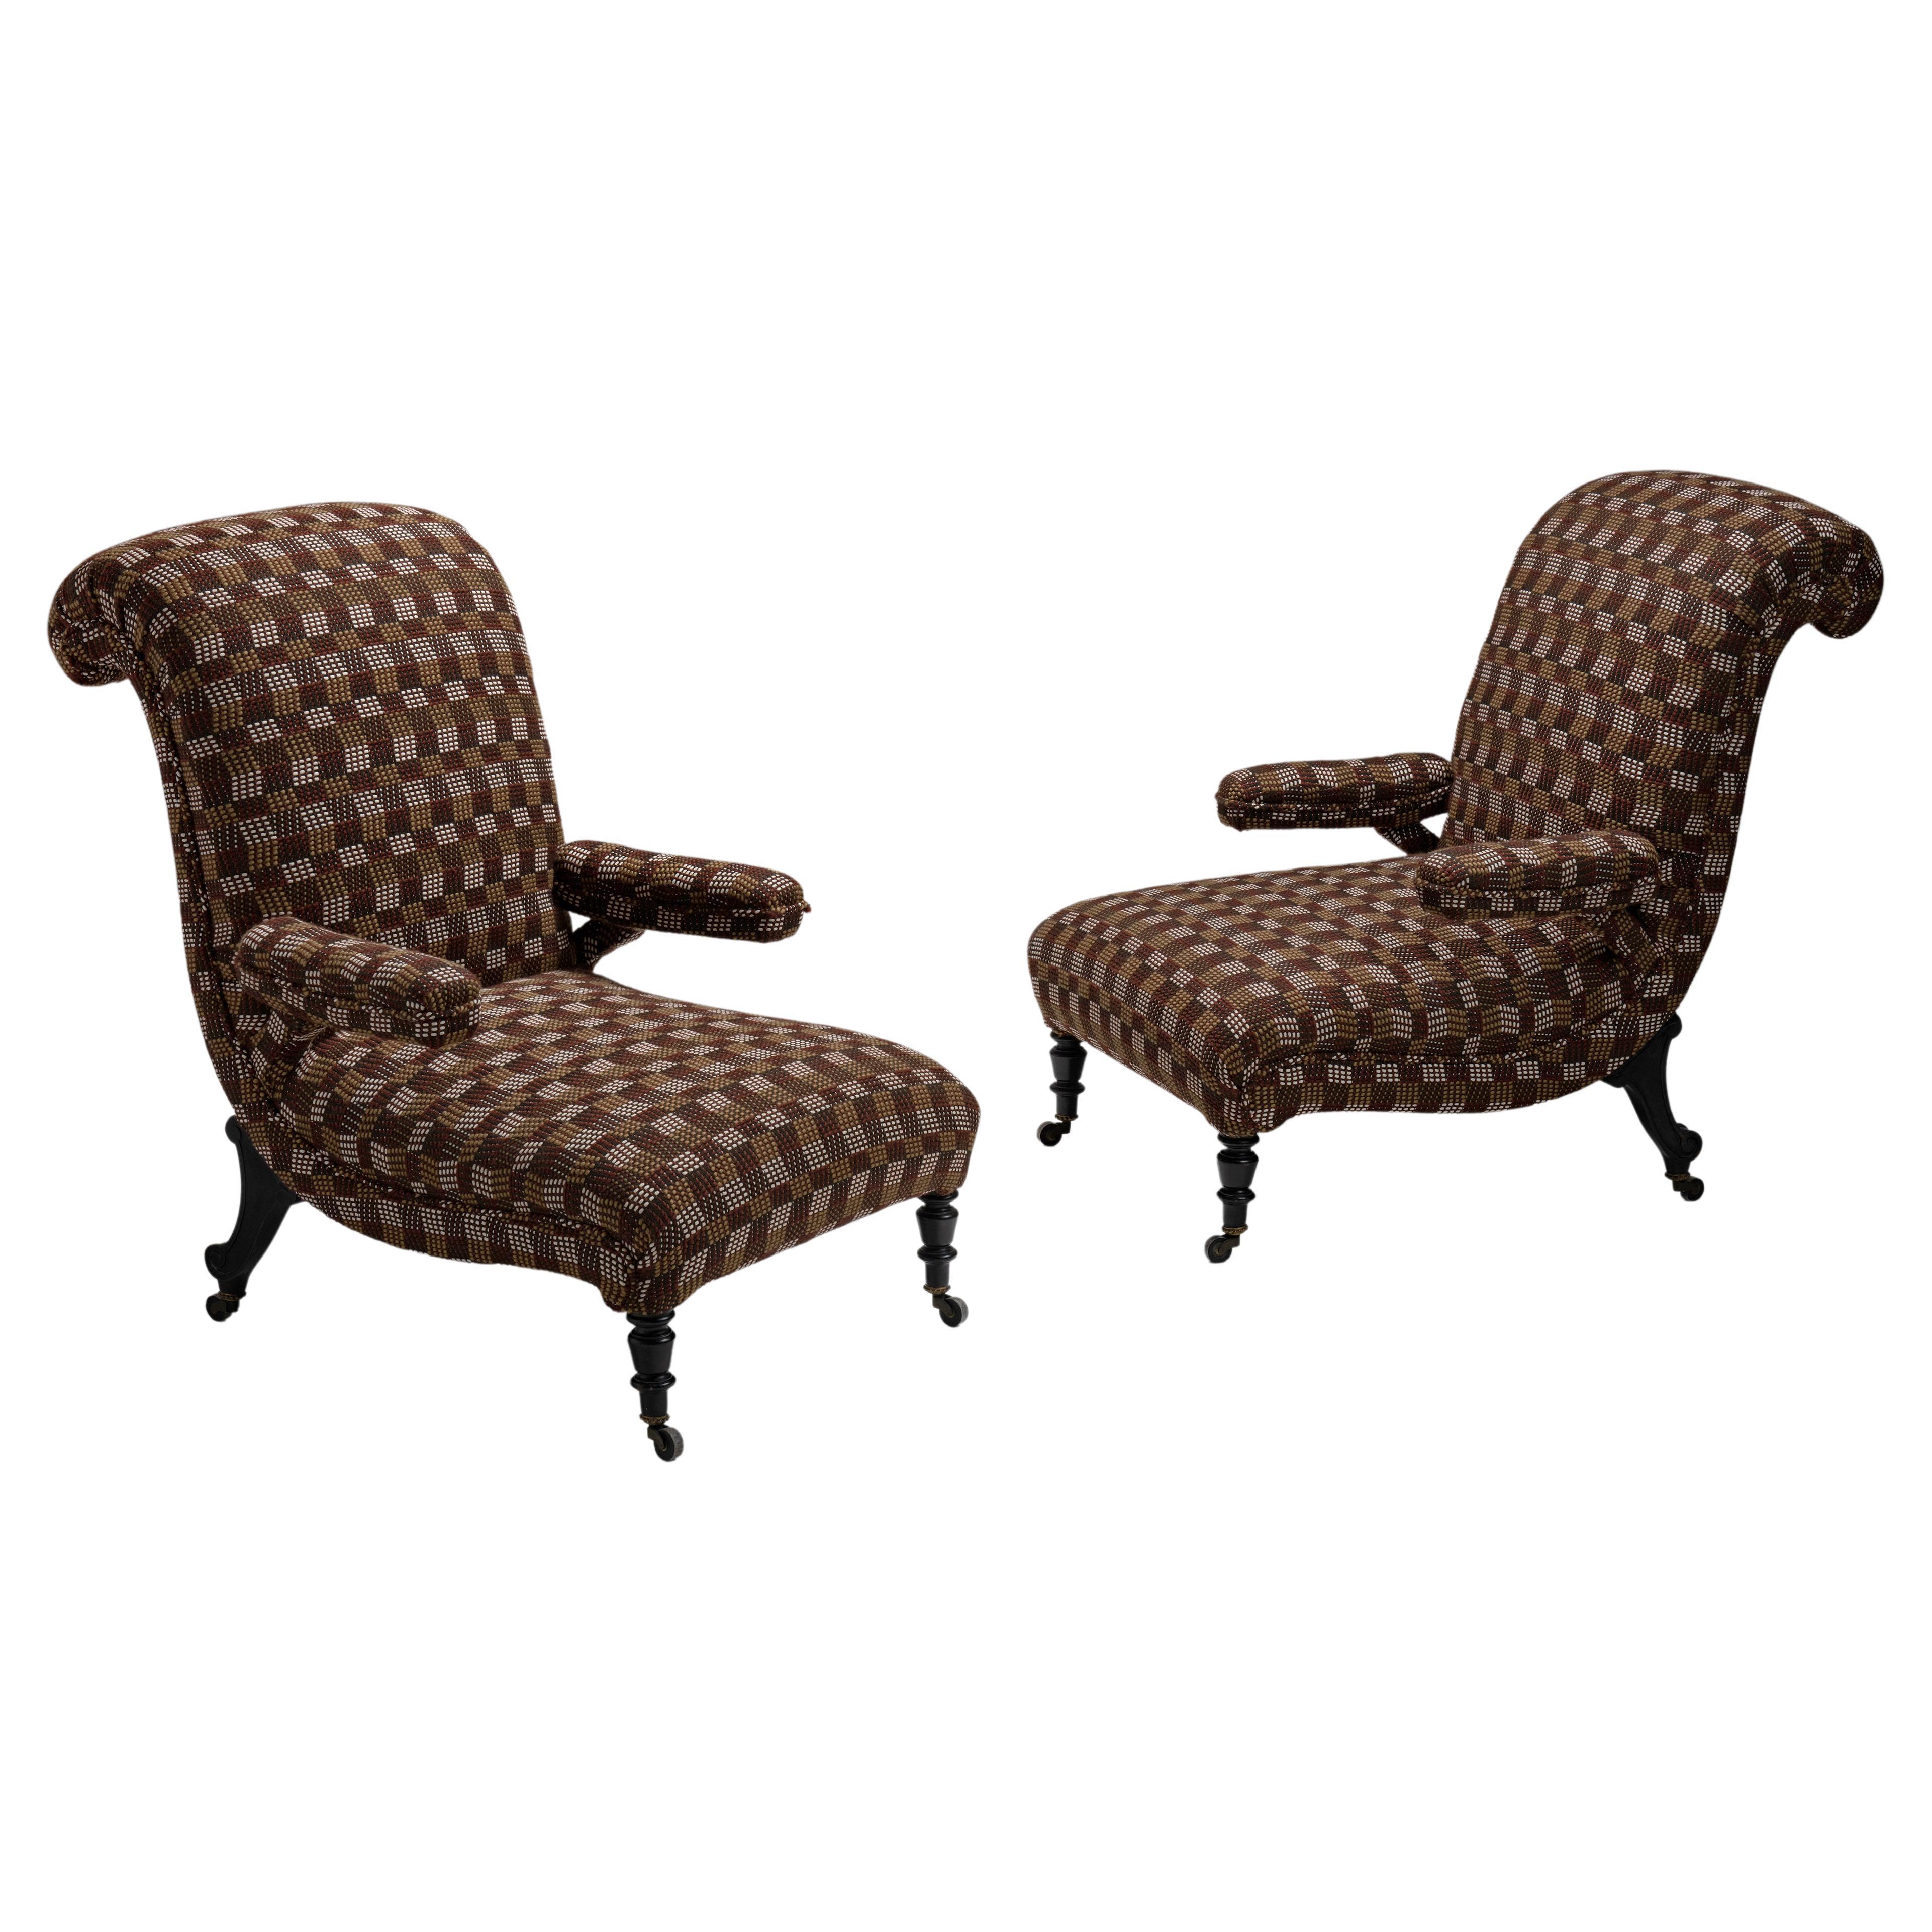 Pair of Scroll Back Armchairs in Wool Blend from Pierre Frey, France, Circa 1890